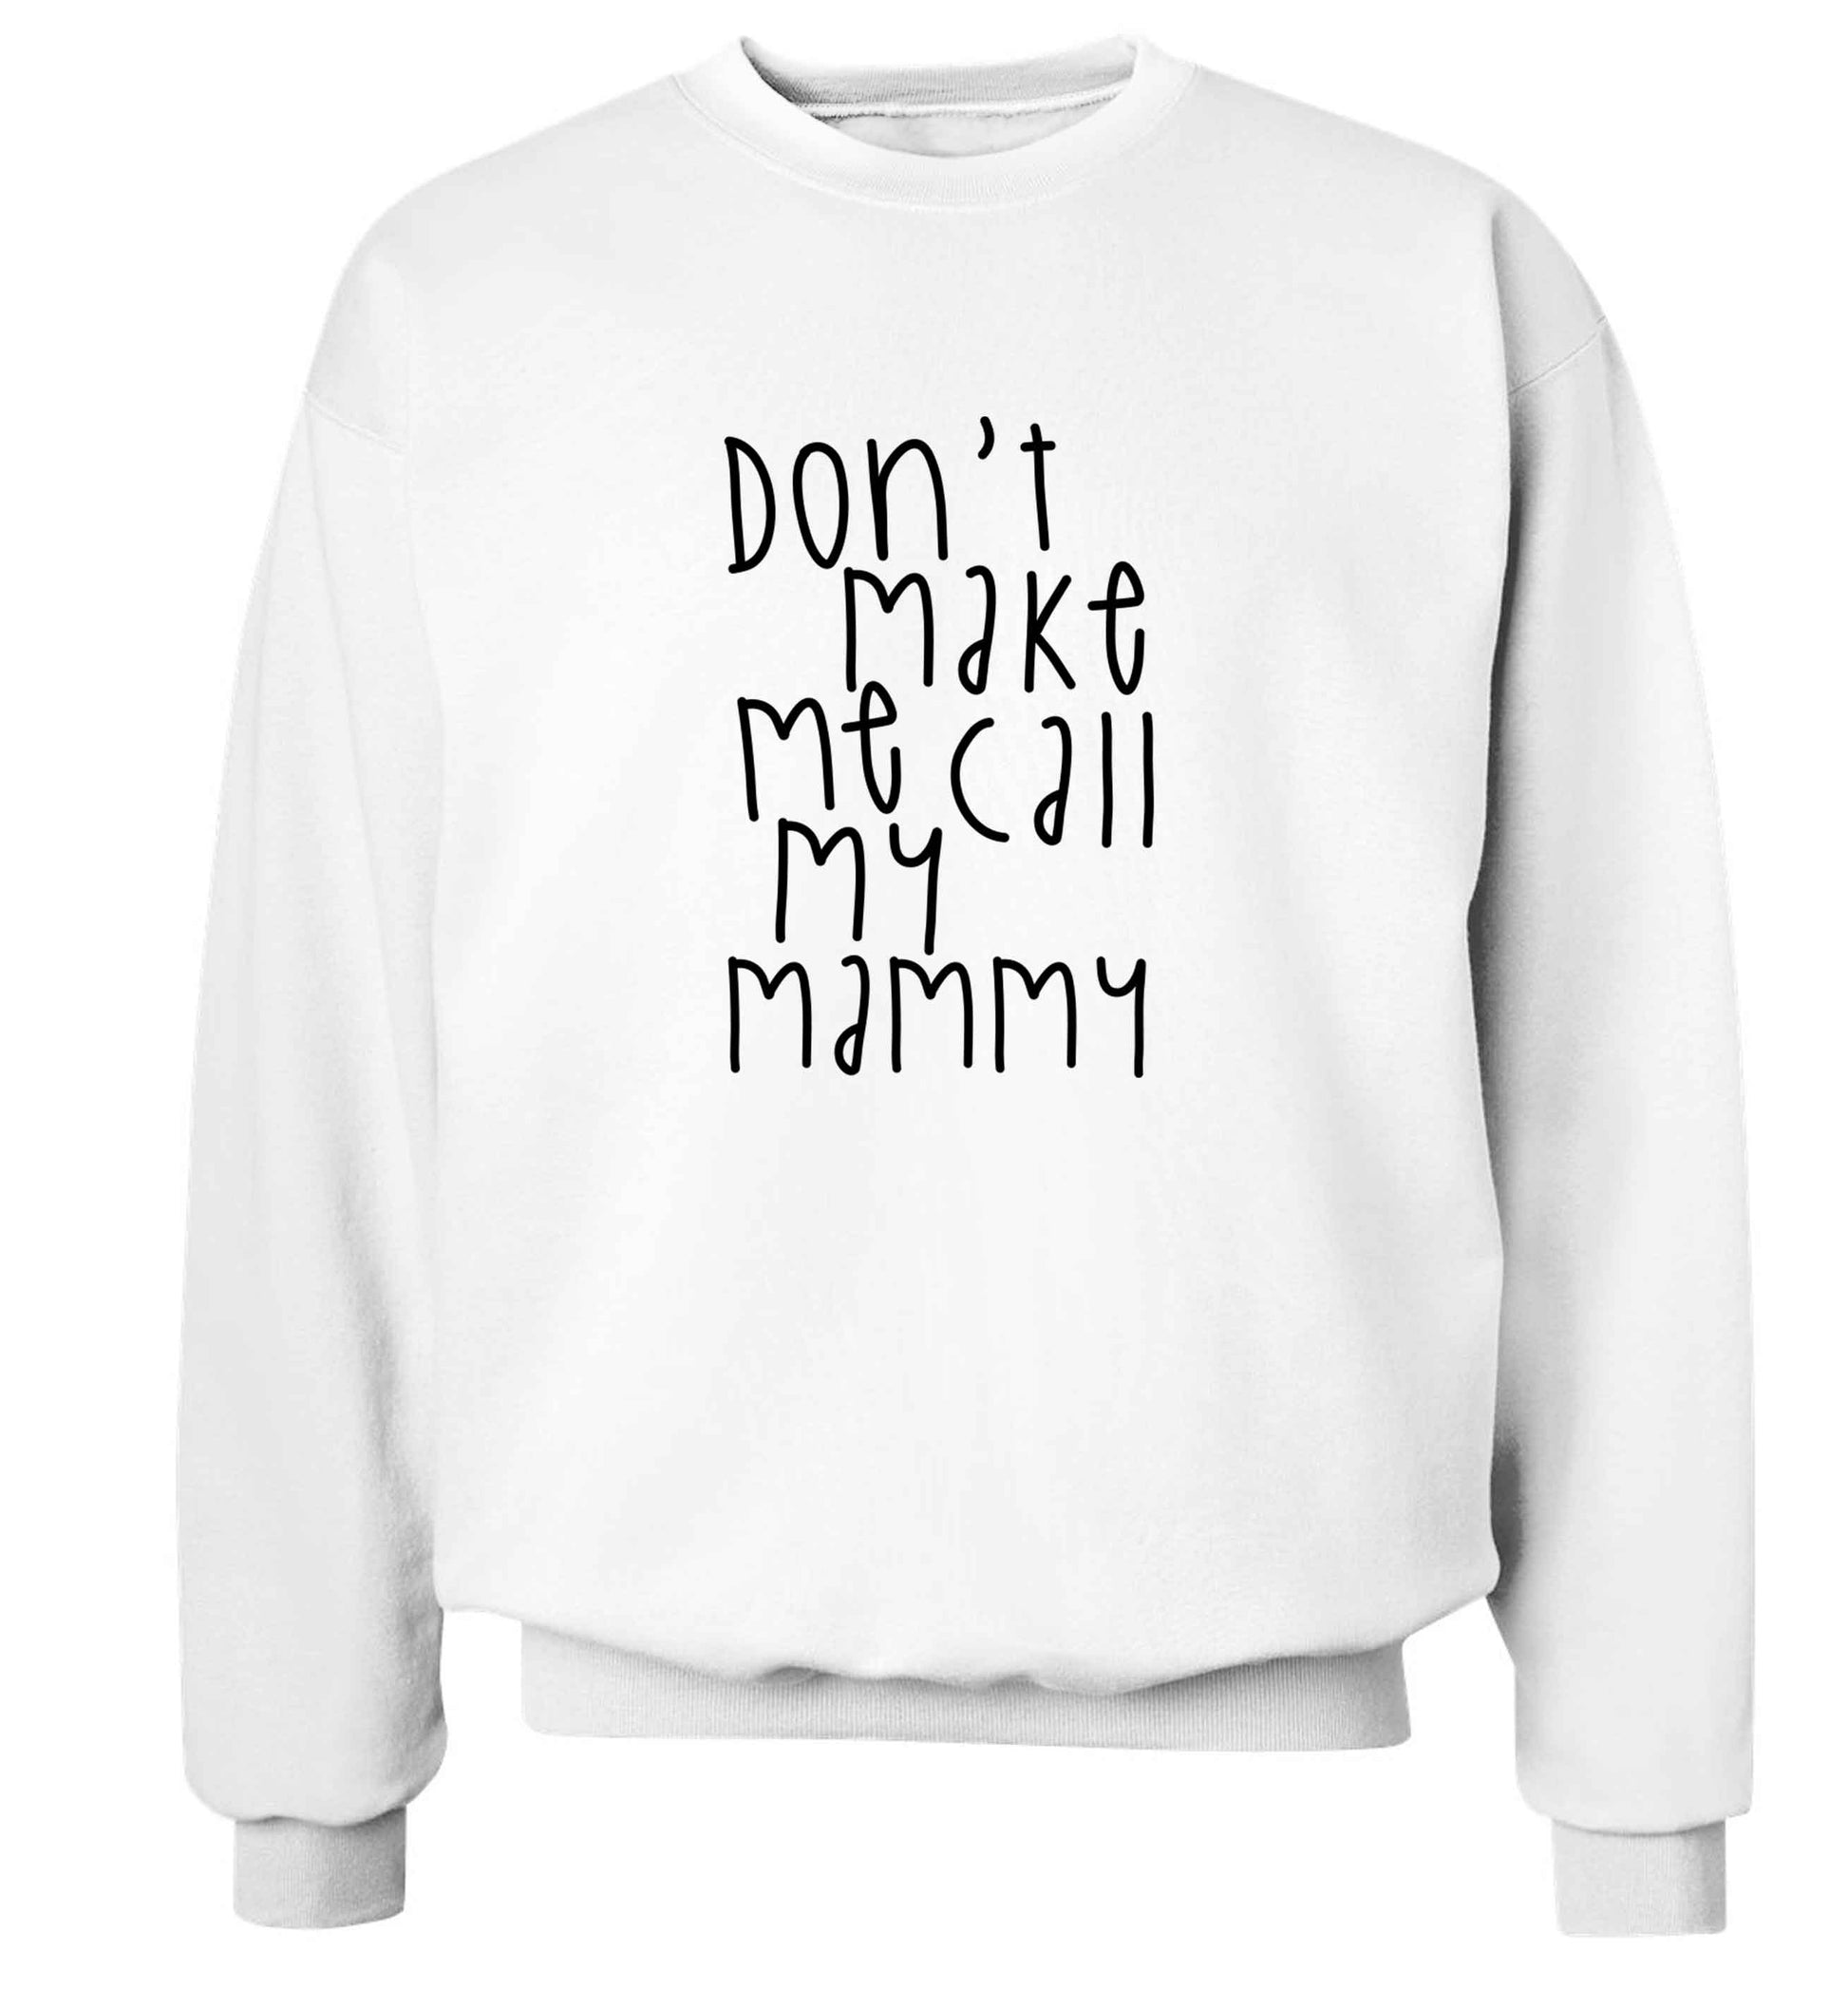 Don't make me call my mammy adult's unisex white sweater 2XL